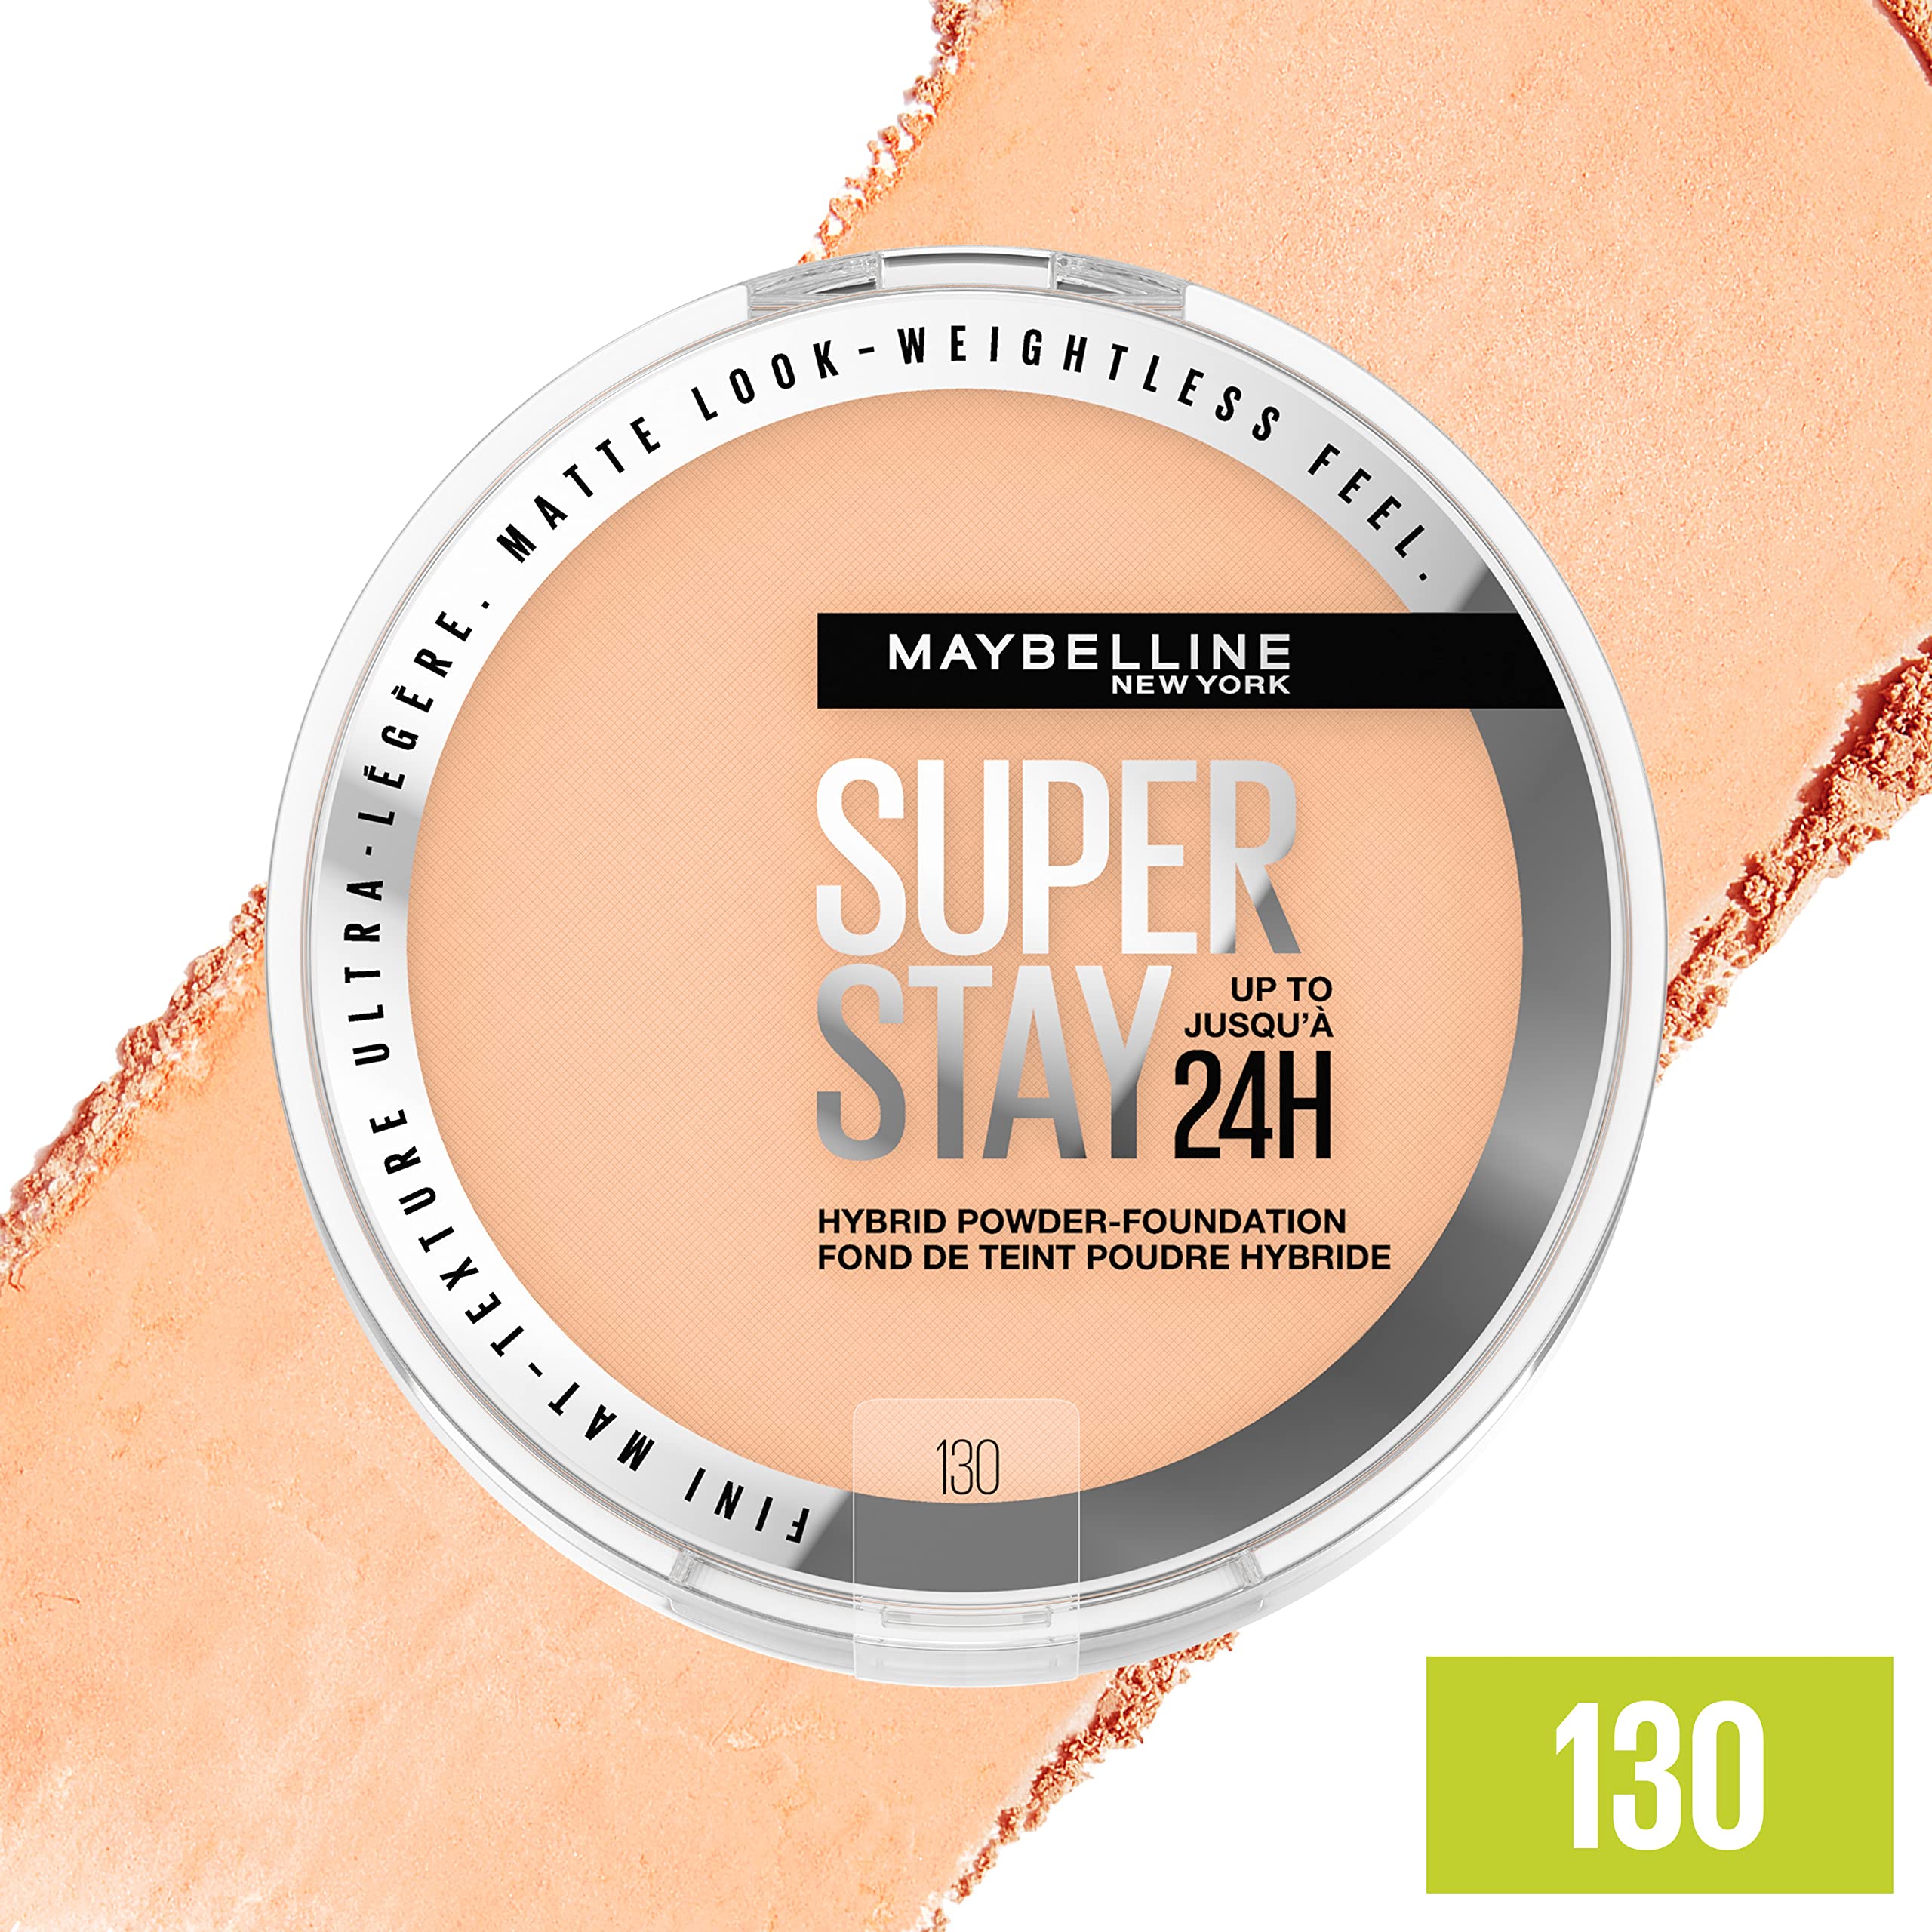 Maybelline New York Super Stay Up to 24HR Hybrid Powder-Foundation, Medium-to-Full Coverage Makeup, Matte Finish, 130, 1 Count